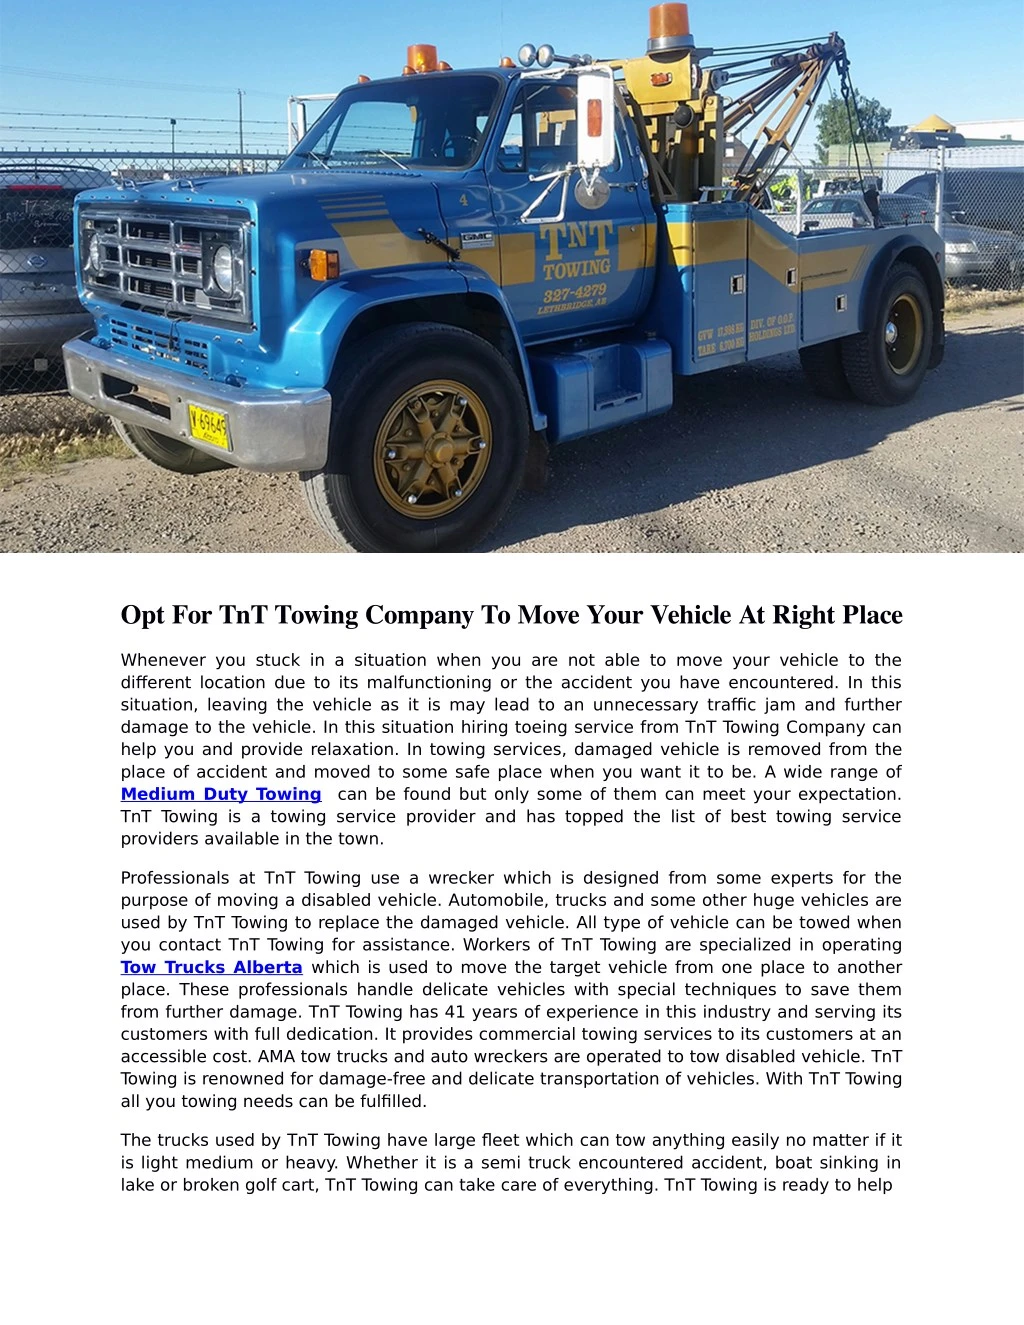 opt for tnt towing company to move your vehicle